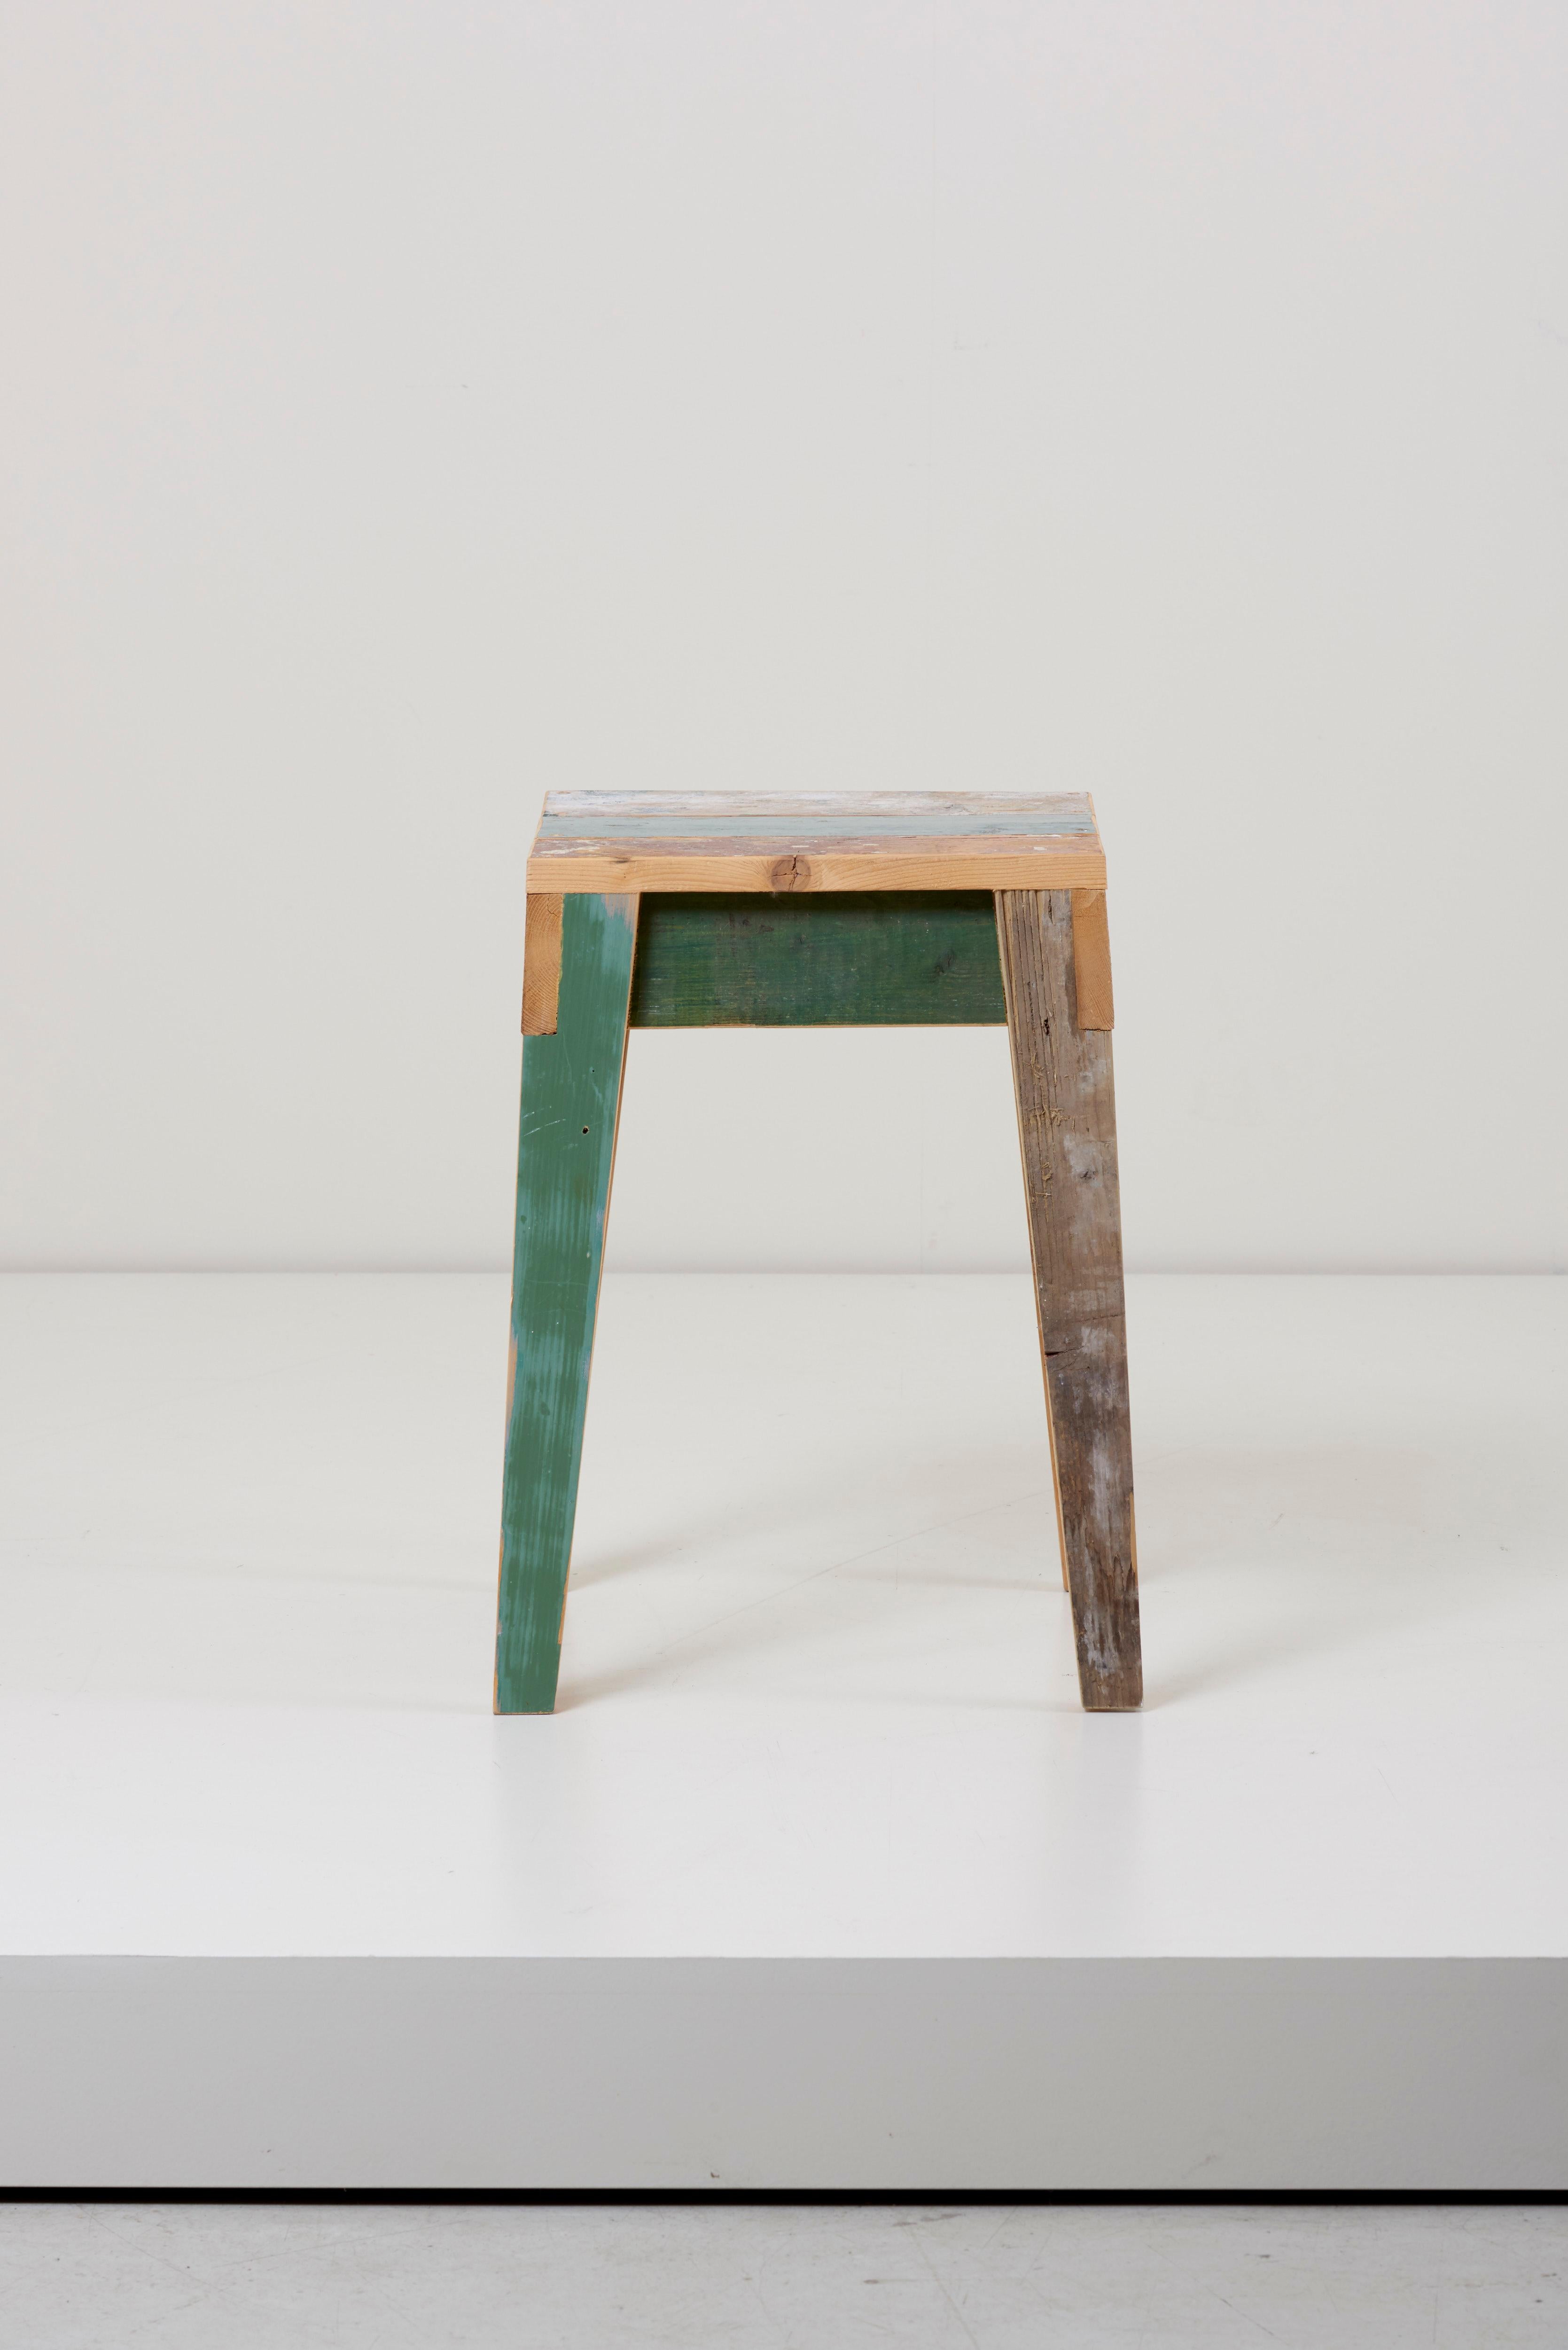 Two unique unvarnished stools made of reclaimed scrapwood in oak by Piet Hein Eek.